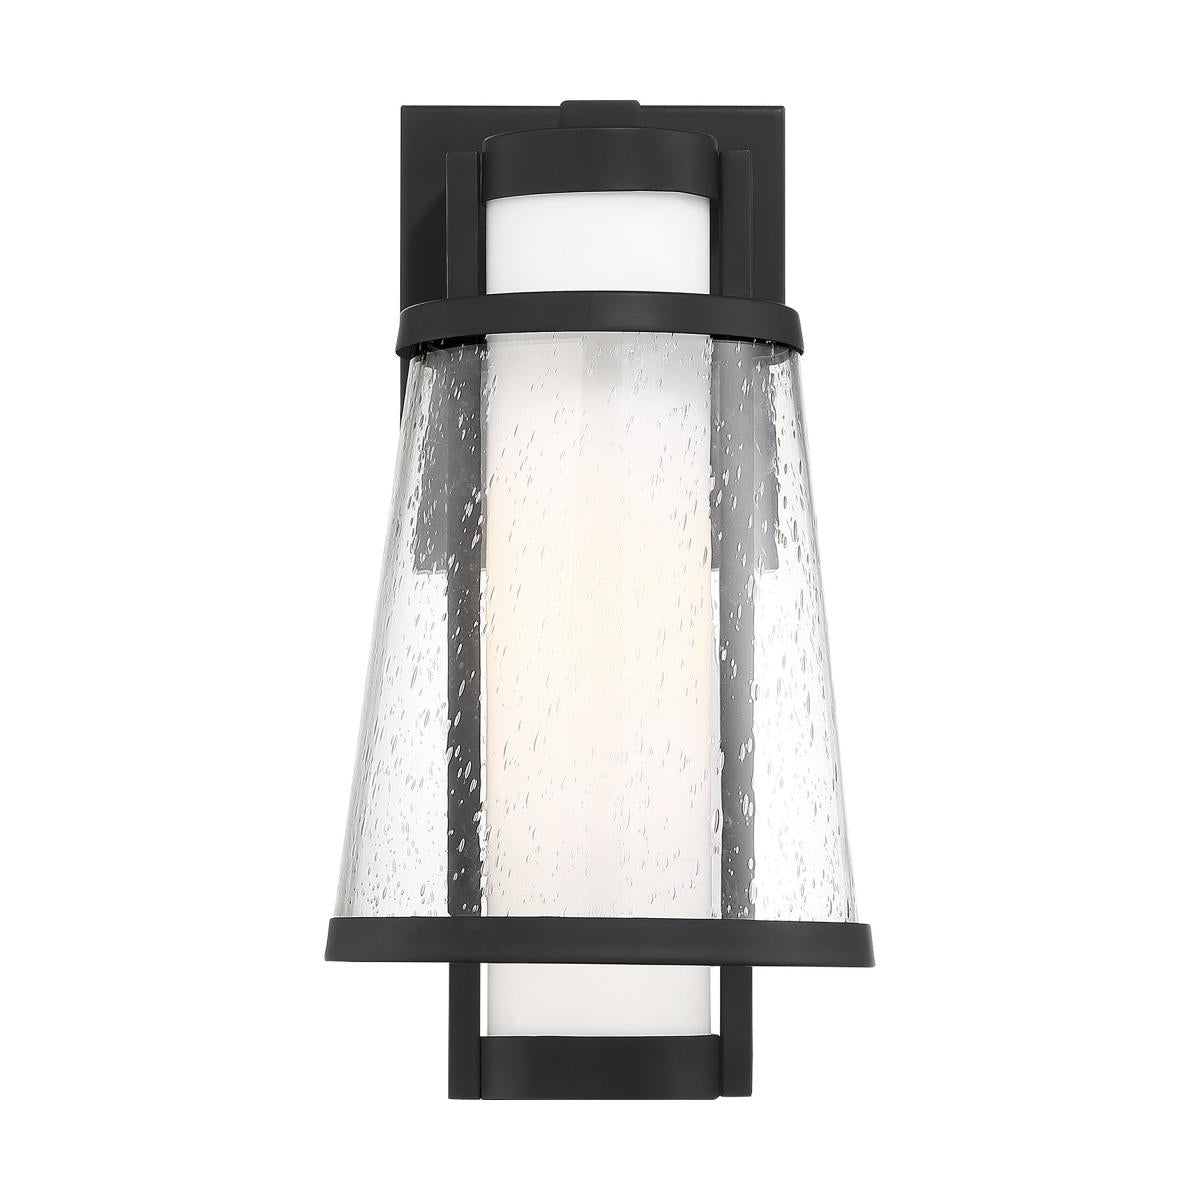 Anau - 1 Light Small Wall Lantern - with Etched Opal and Clear Glass - Matte Black Finish